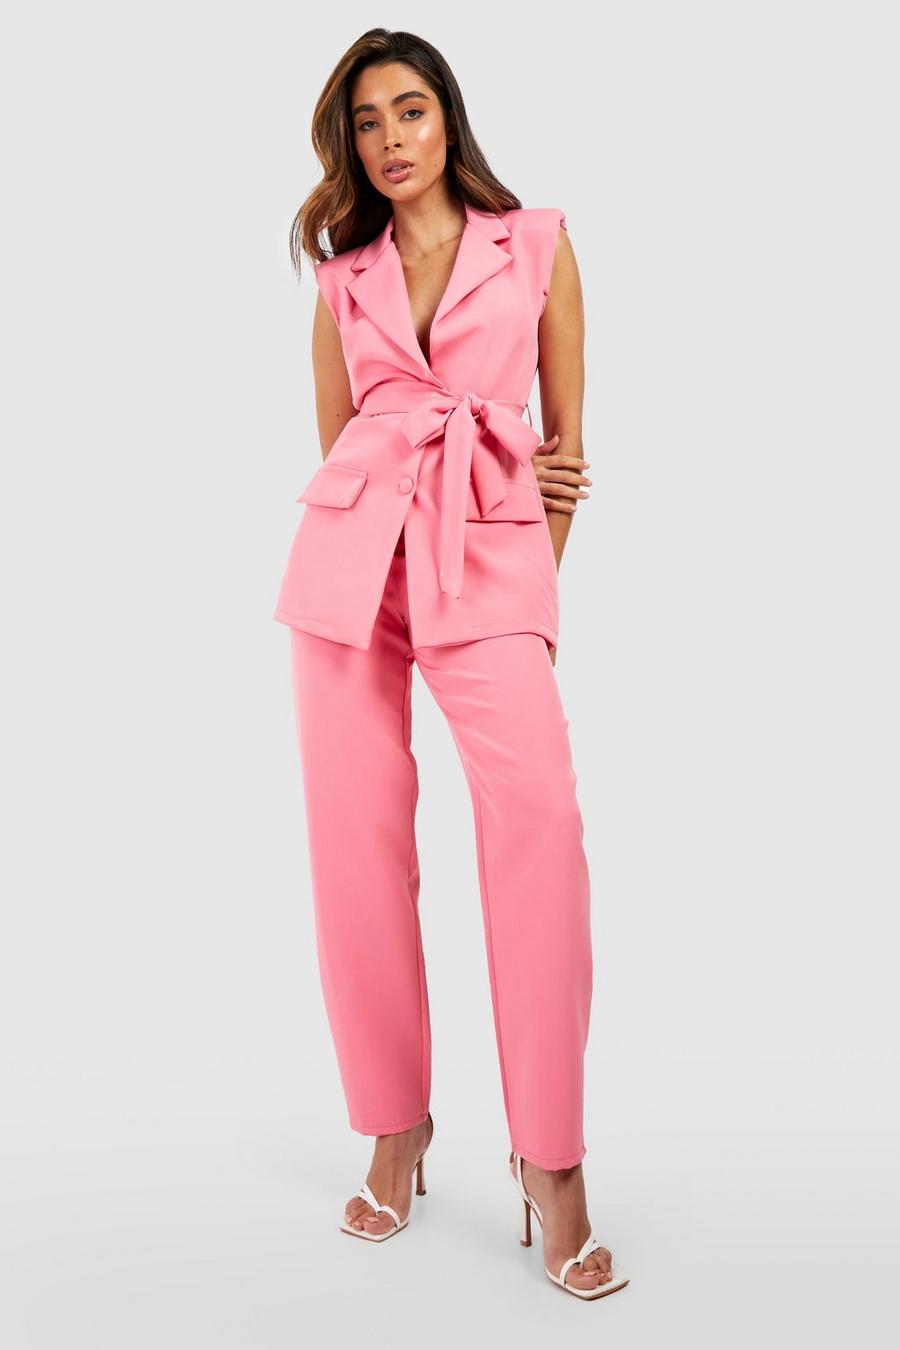 Candy pink Straight Leg Ankle Grazer Pants